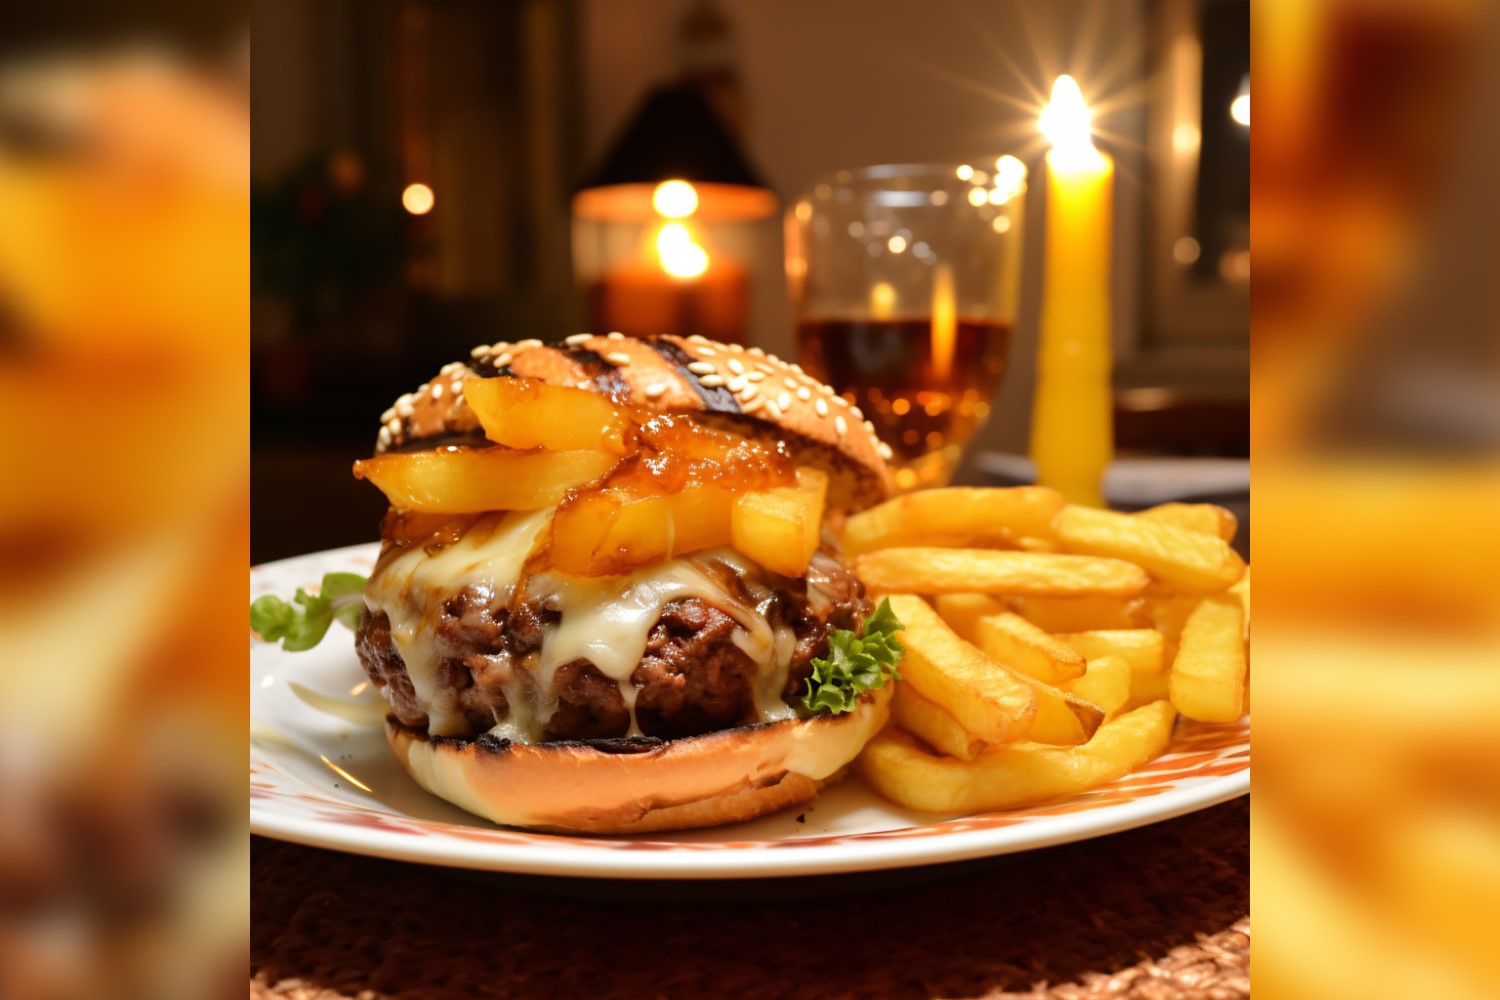 Beef burger with cheddar served with french fries 48